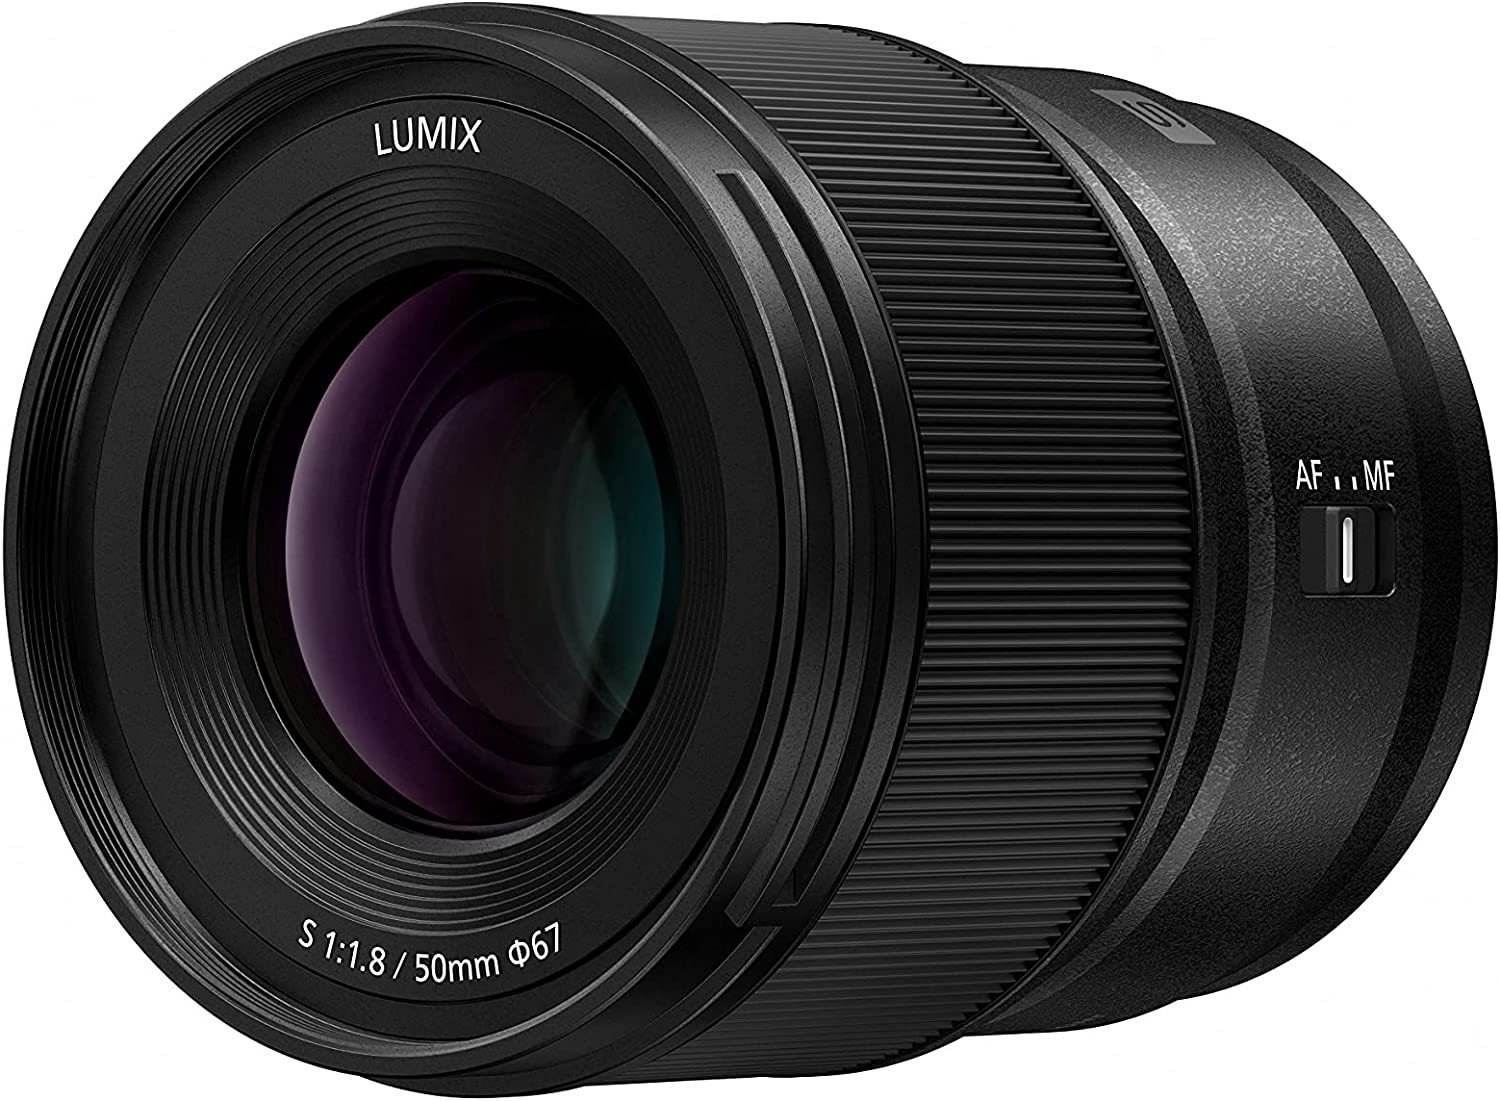 Primary image for PANASONIC LUMIX S Series Camera Lens, 50mm F1.8 L-Mount Interchangeable Lens for